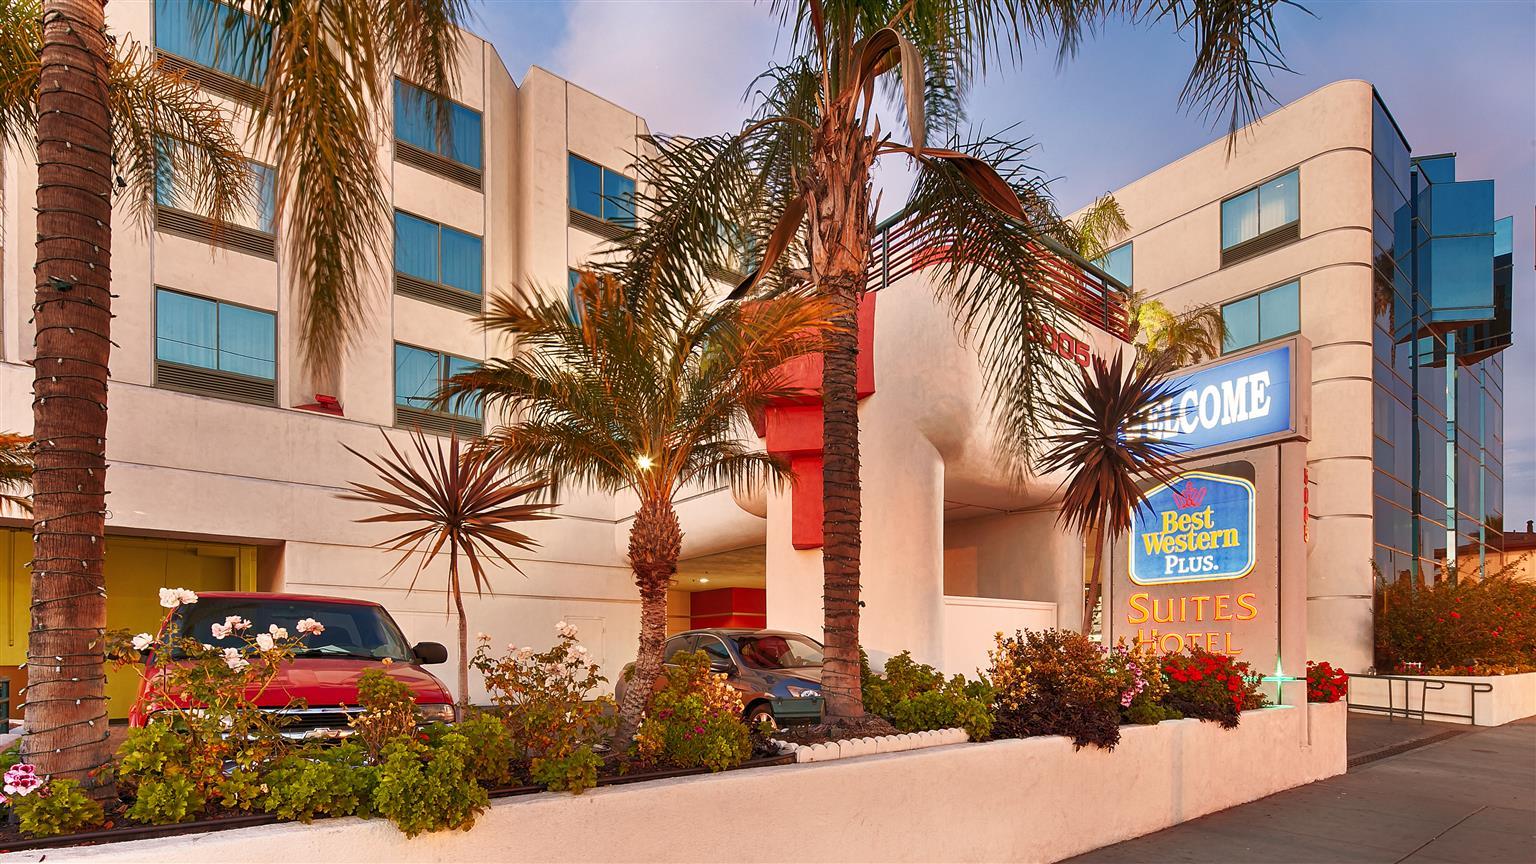 Best Western Plus Suites Hotel - Los Angeles Lax Airport Инглвуд Экстерьер фото